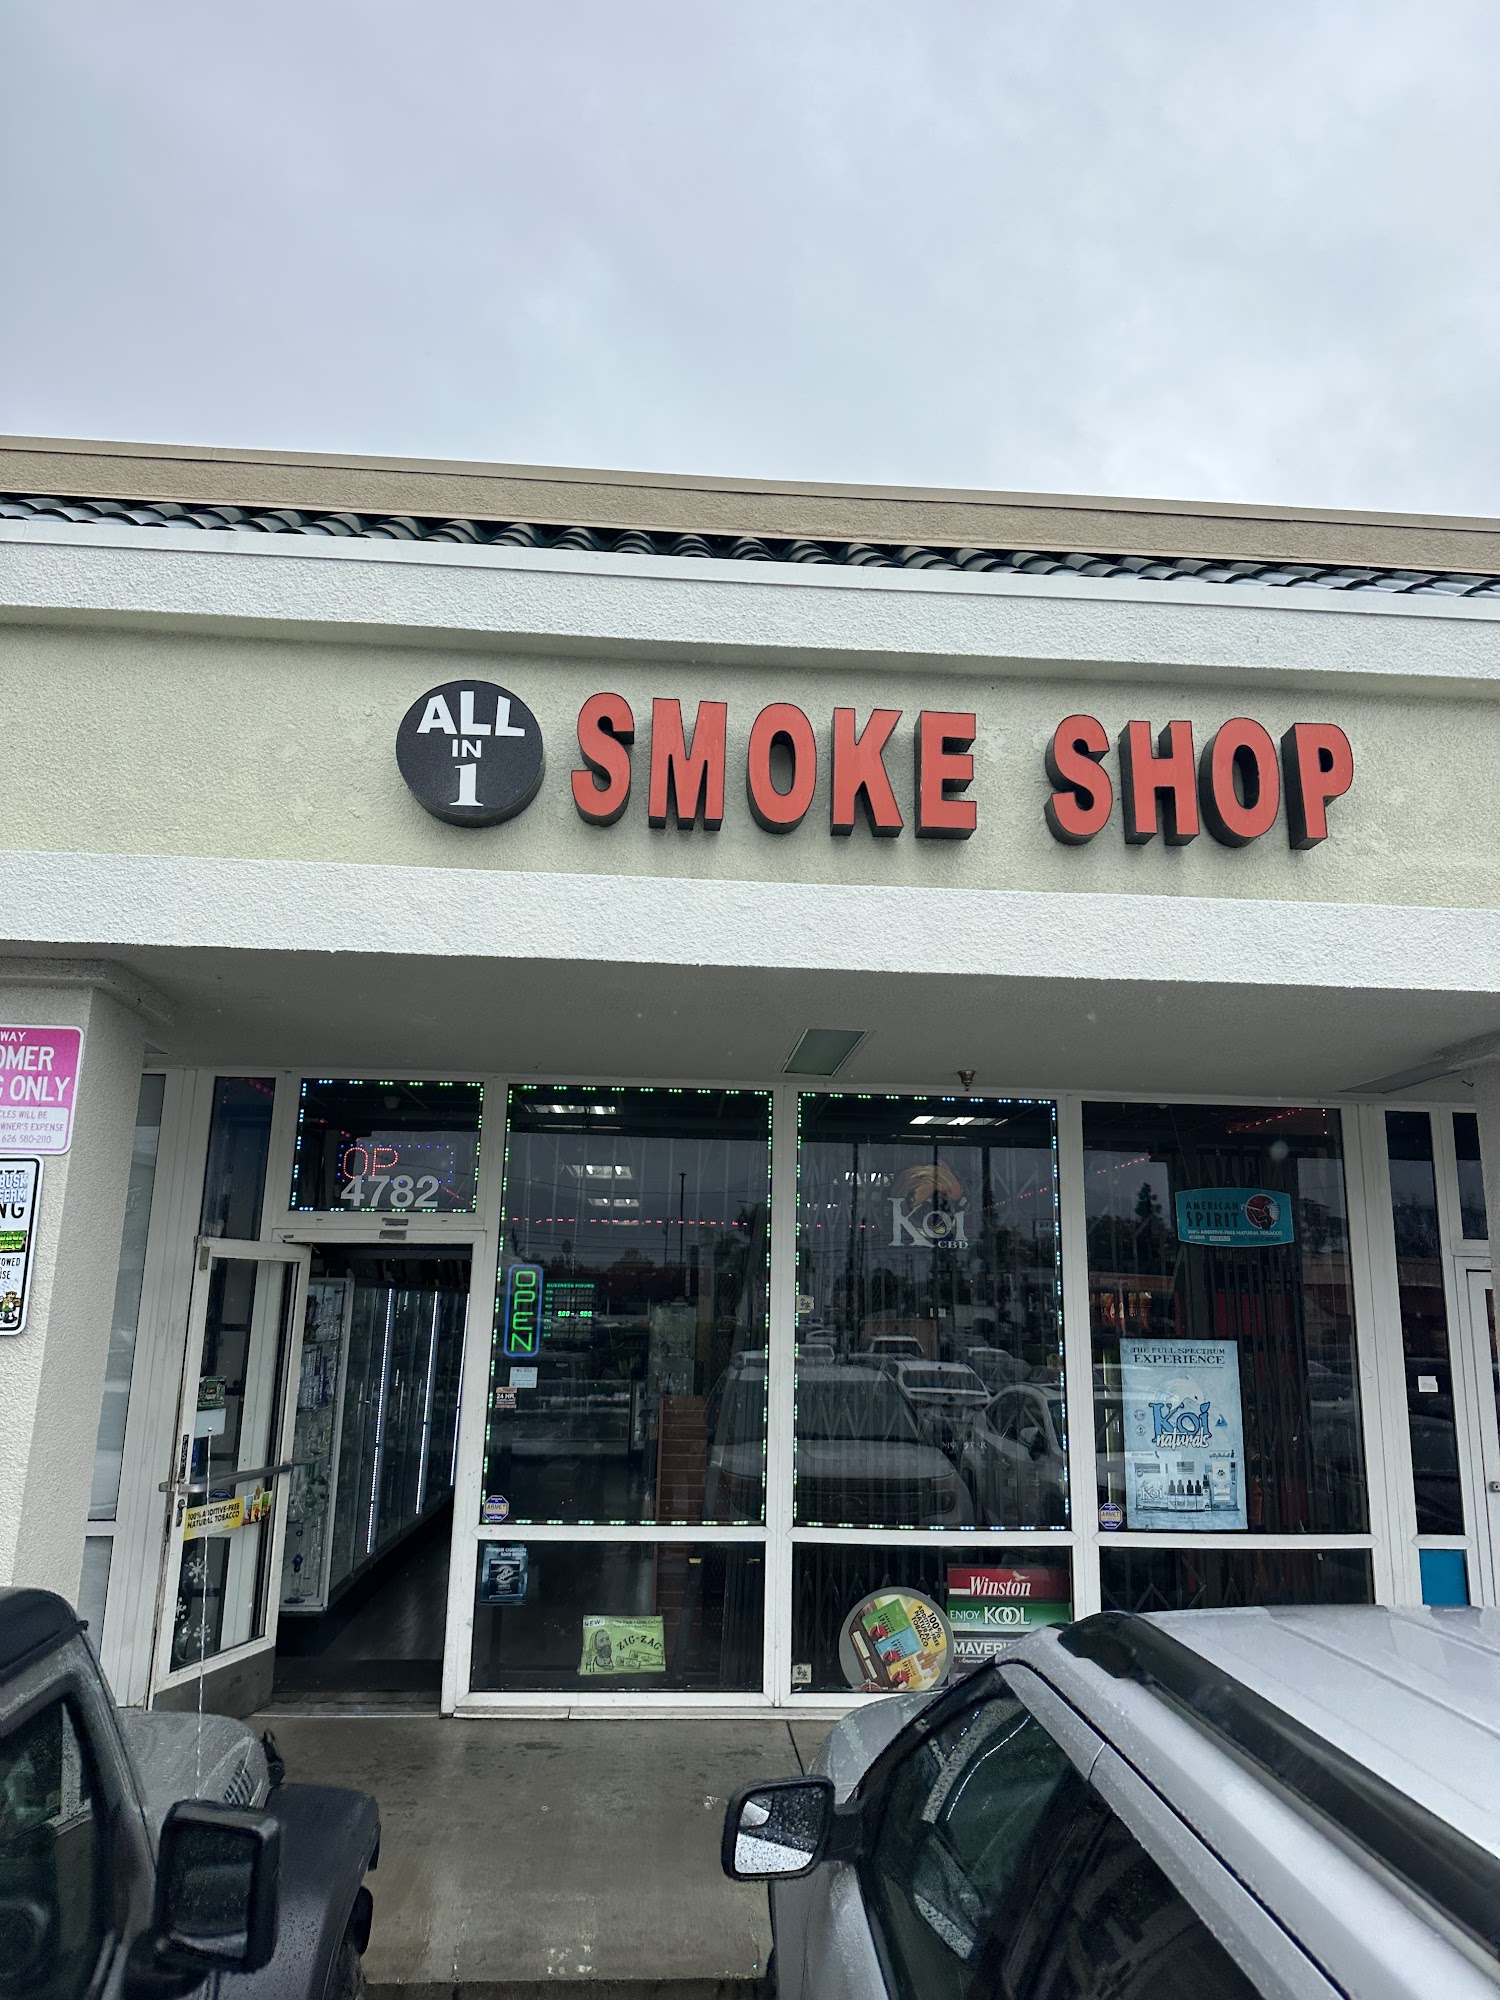 All in 1 smoke shop